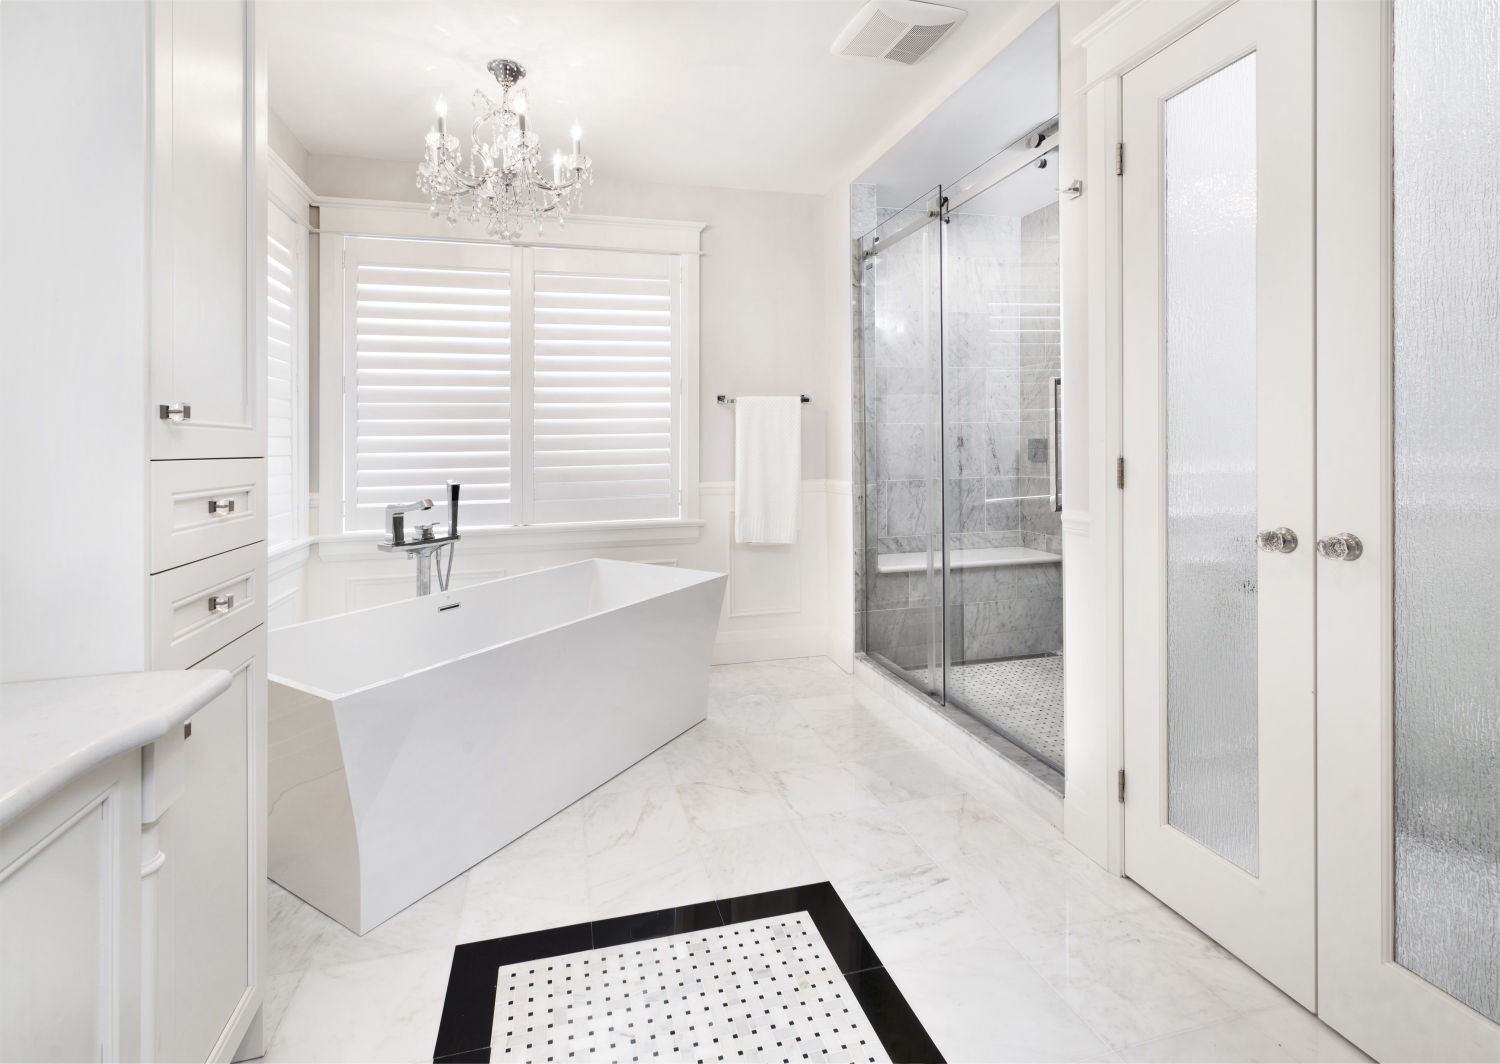 Photo of a modern white bathroom with large tub